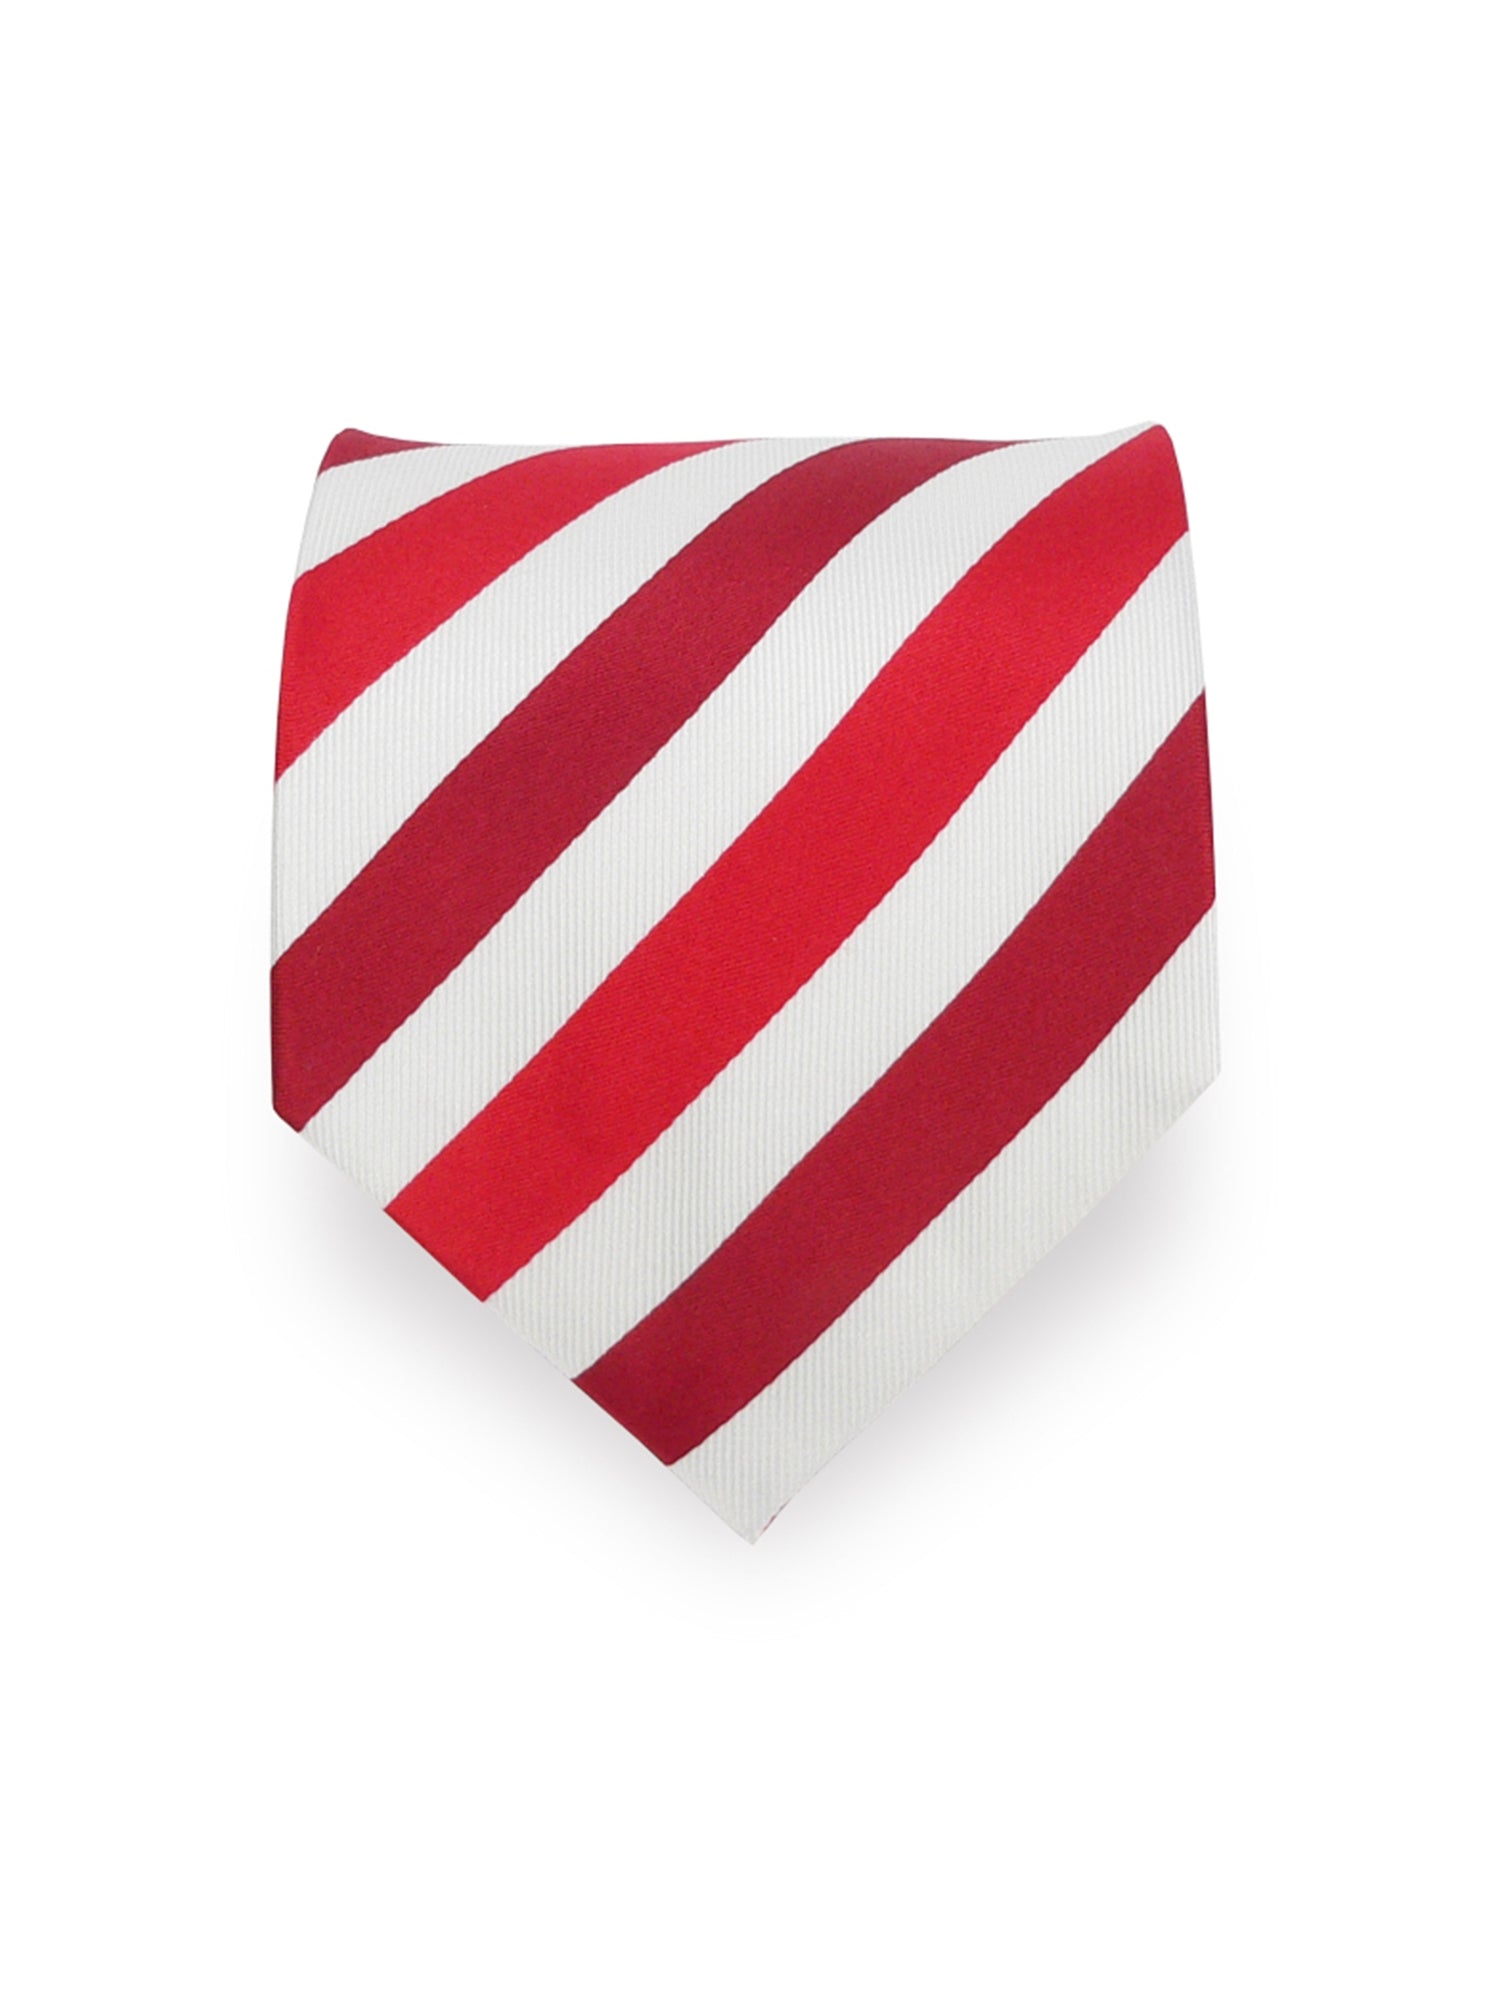 Collection of Silk Super Extra Special Long Neck Tie Neck Tie TheDapperTie Striped Red And White Extra Long 